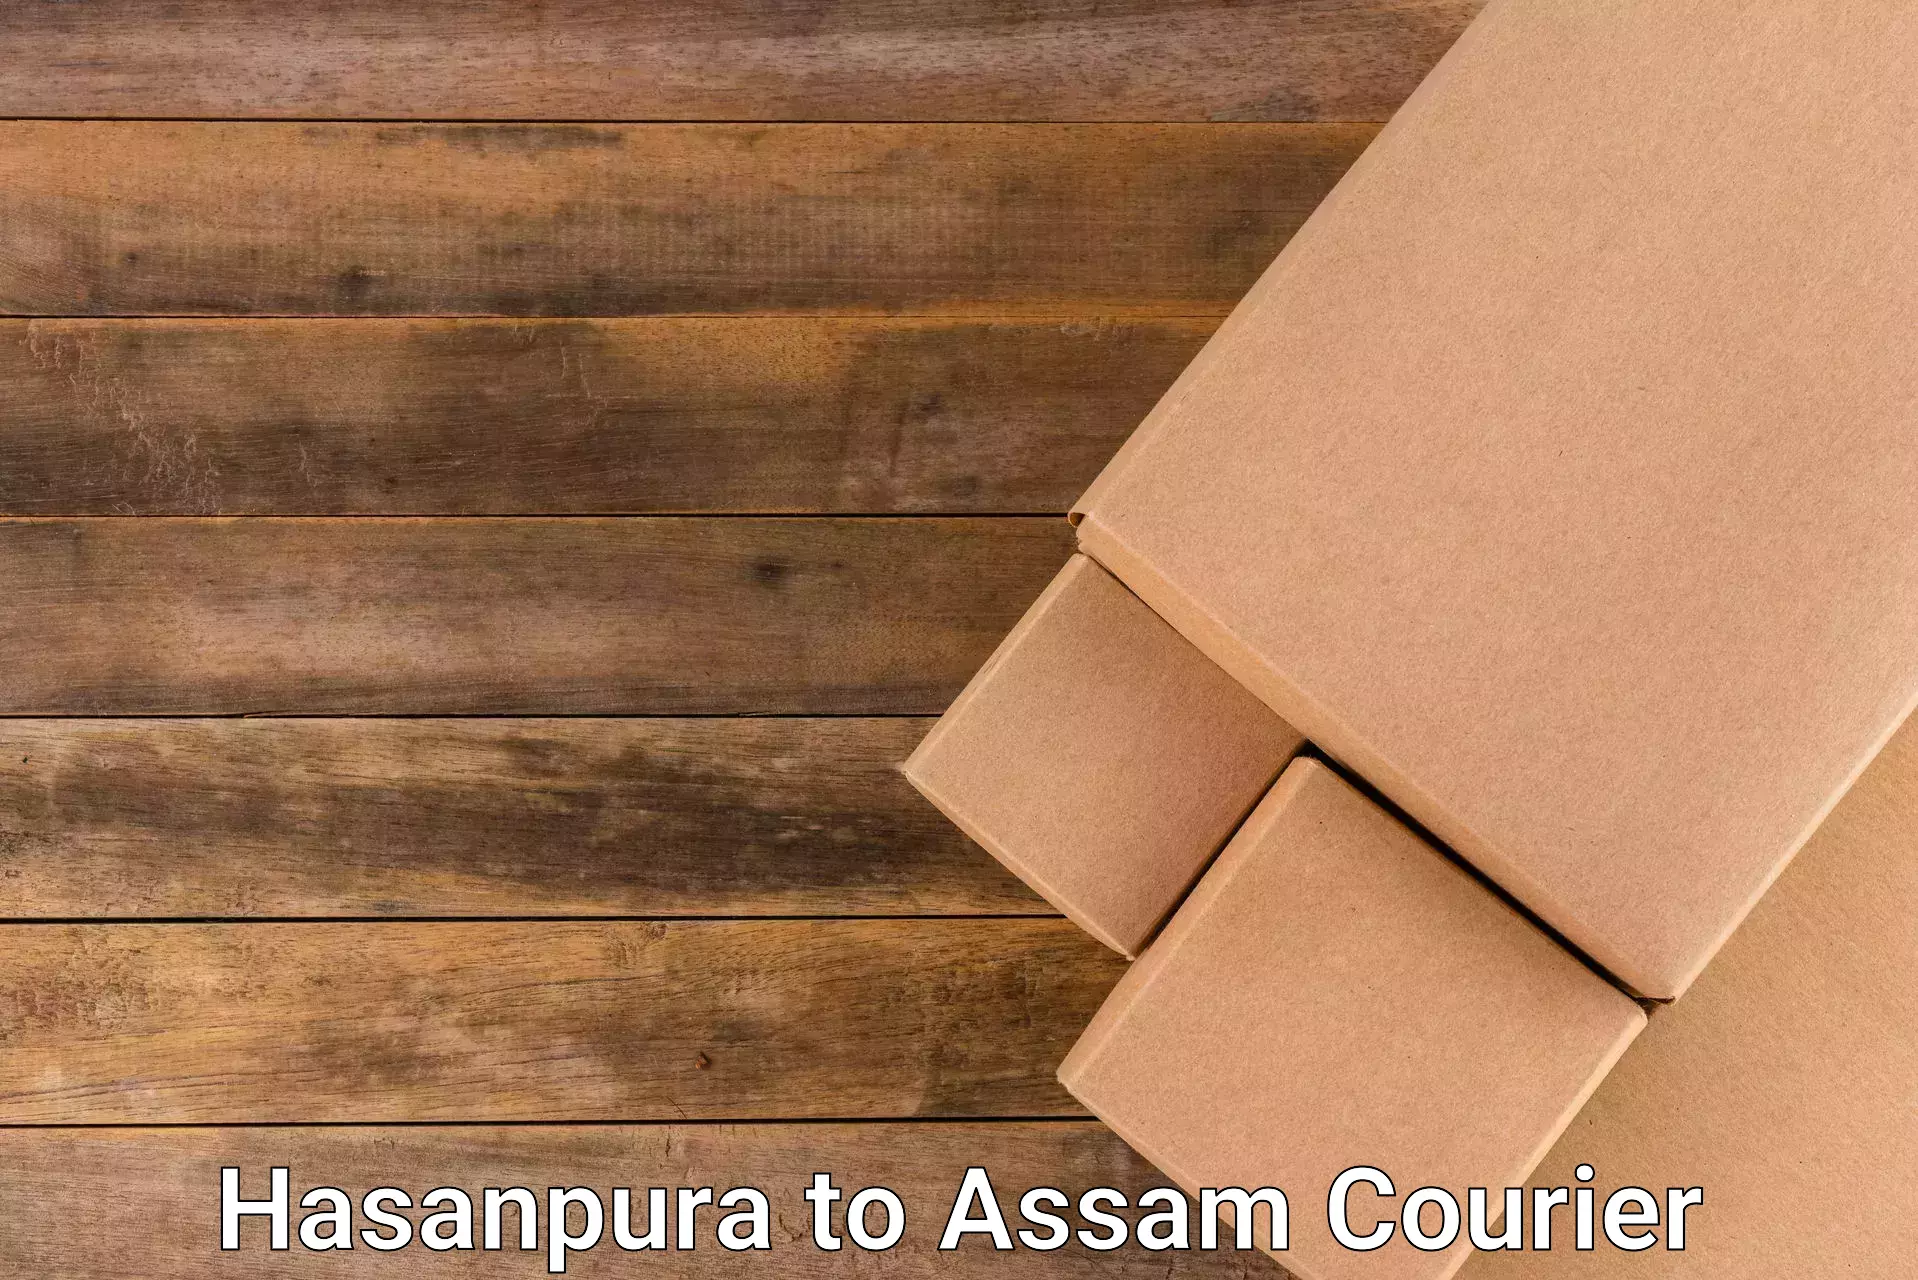 Cash on delivery service Hasanpura to Assam